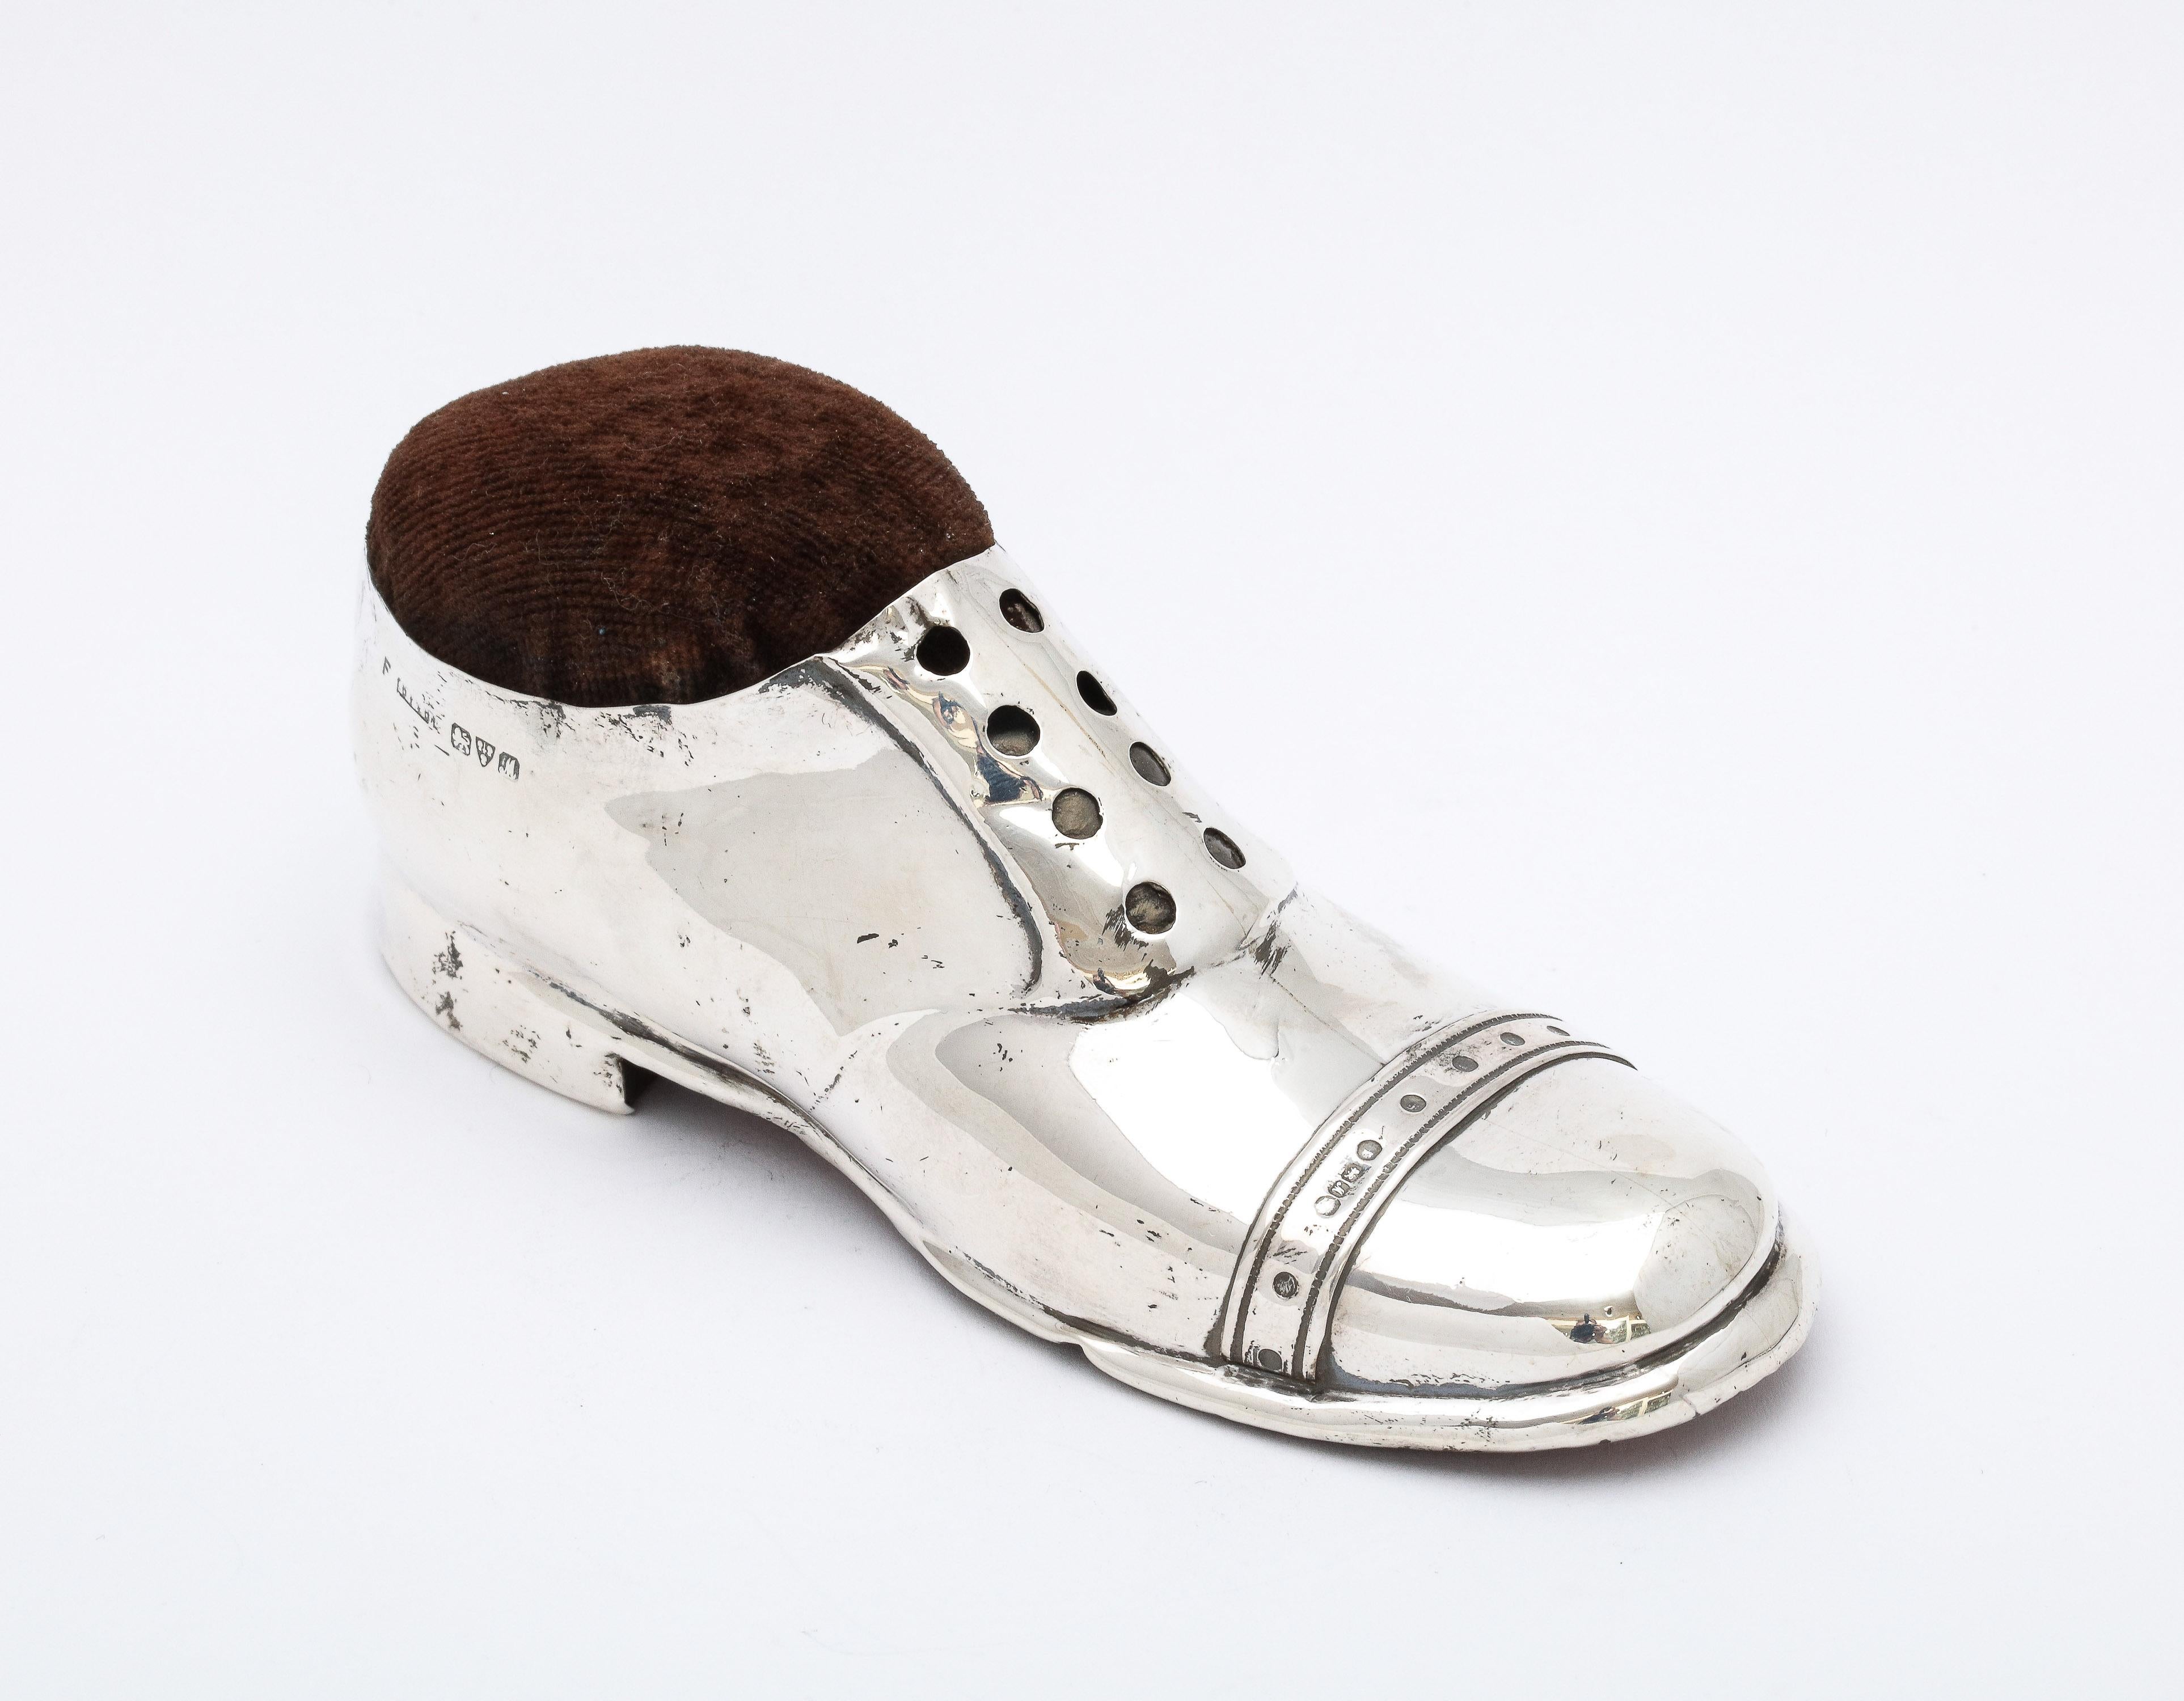 Unusual, large, sterling silver shoe-form pincushion, having a wooden sole, Chester, England, year-hallmarked for 1912, S. Blankinsee and Sons - makers. Pin cushion itself is made from brown velvet, which has some minor scuffing (see photos)